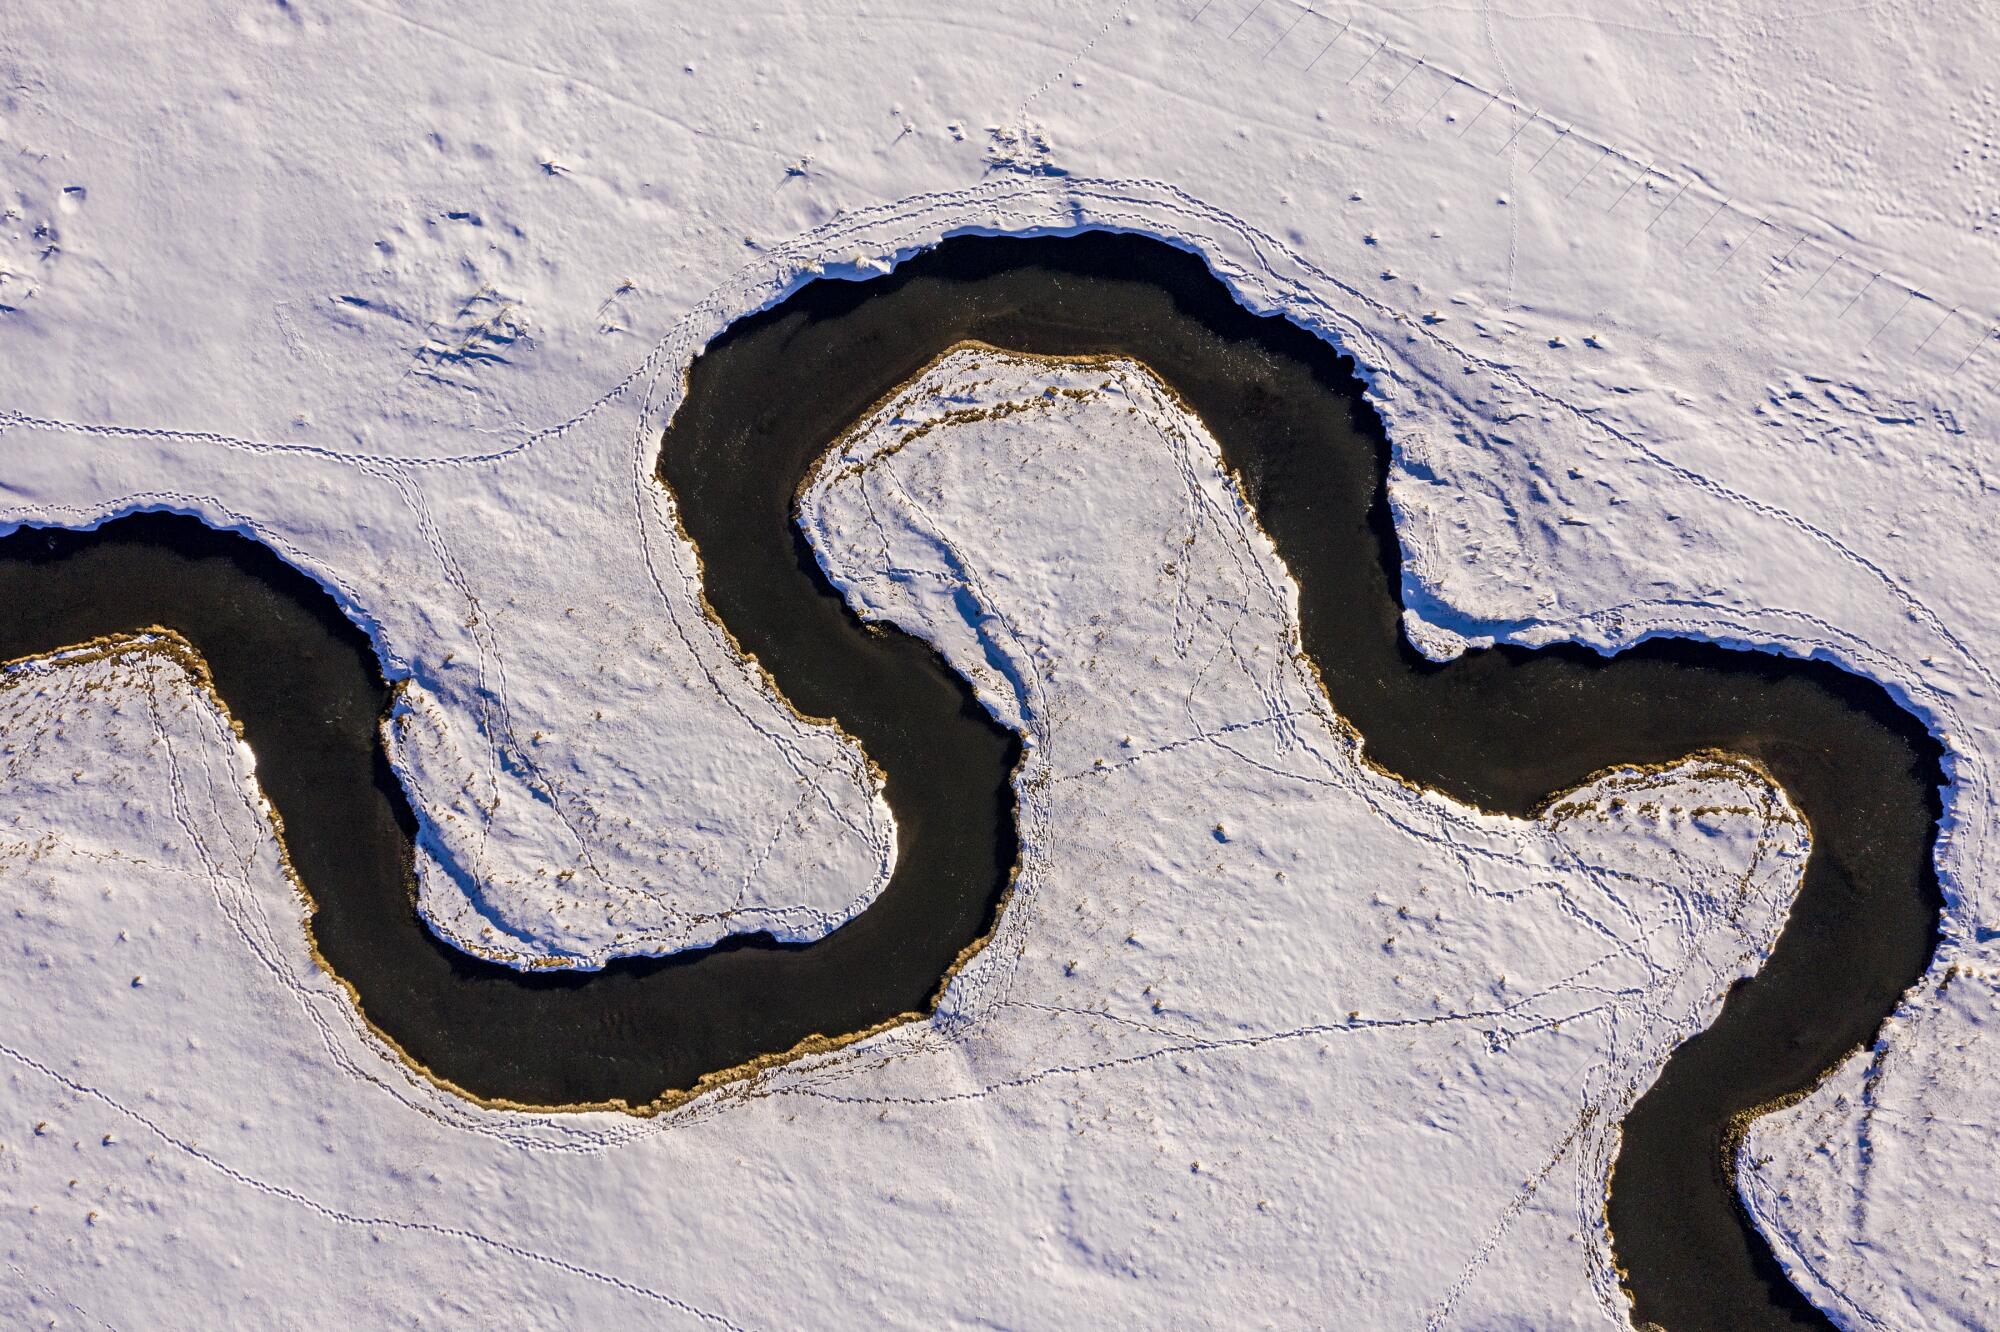 A snowy Owens River from above